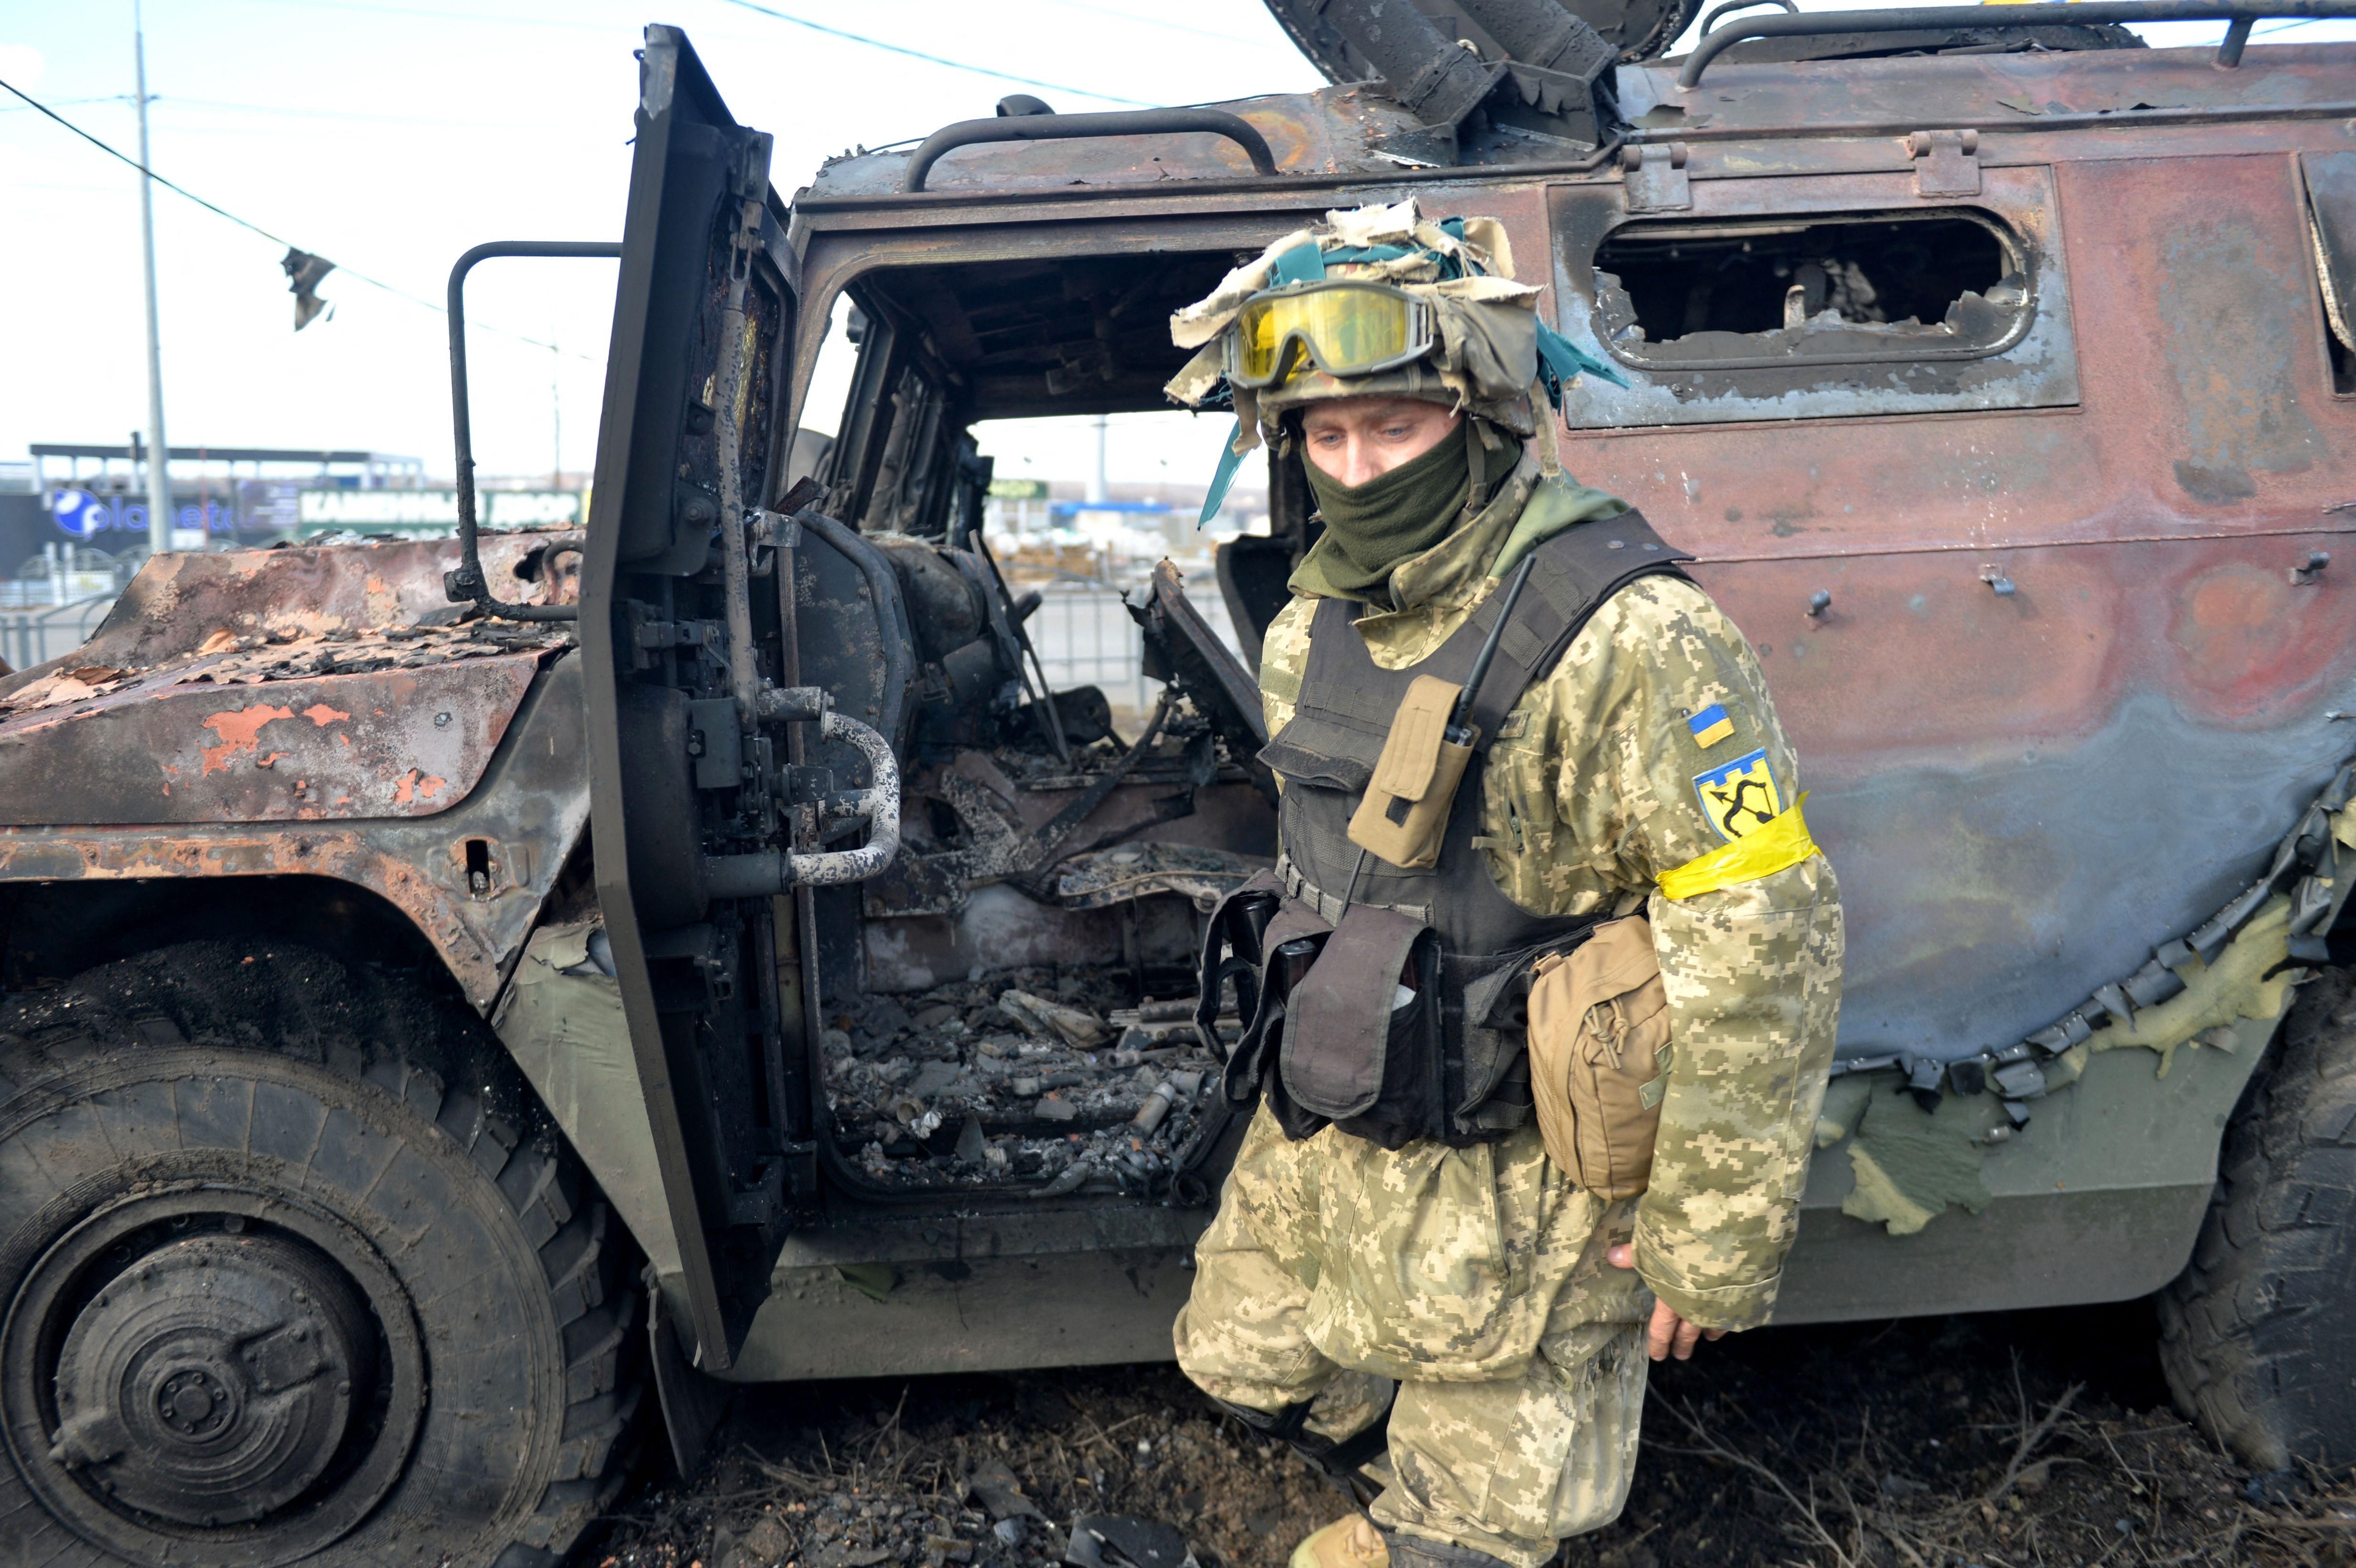 Ukraine soldier examines destroyed Russian military vehicle